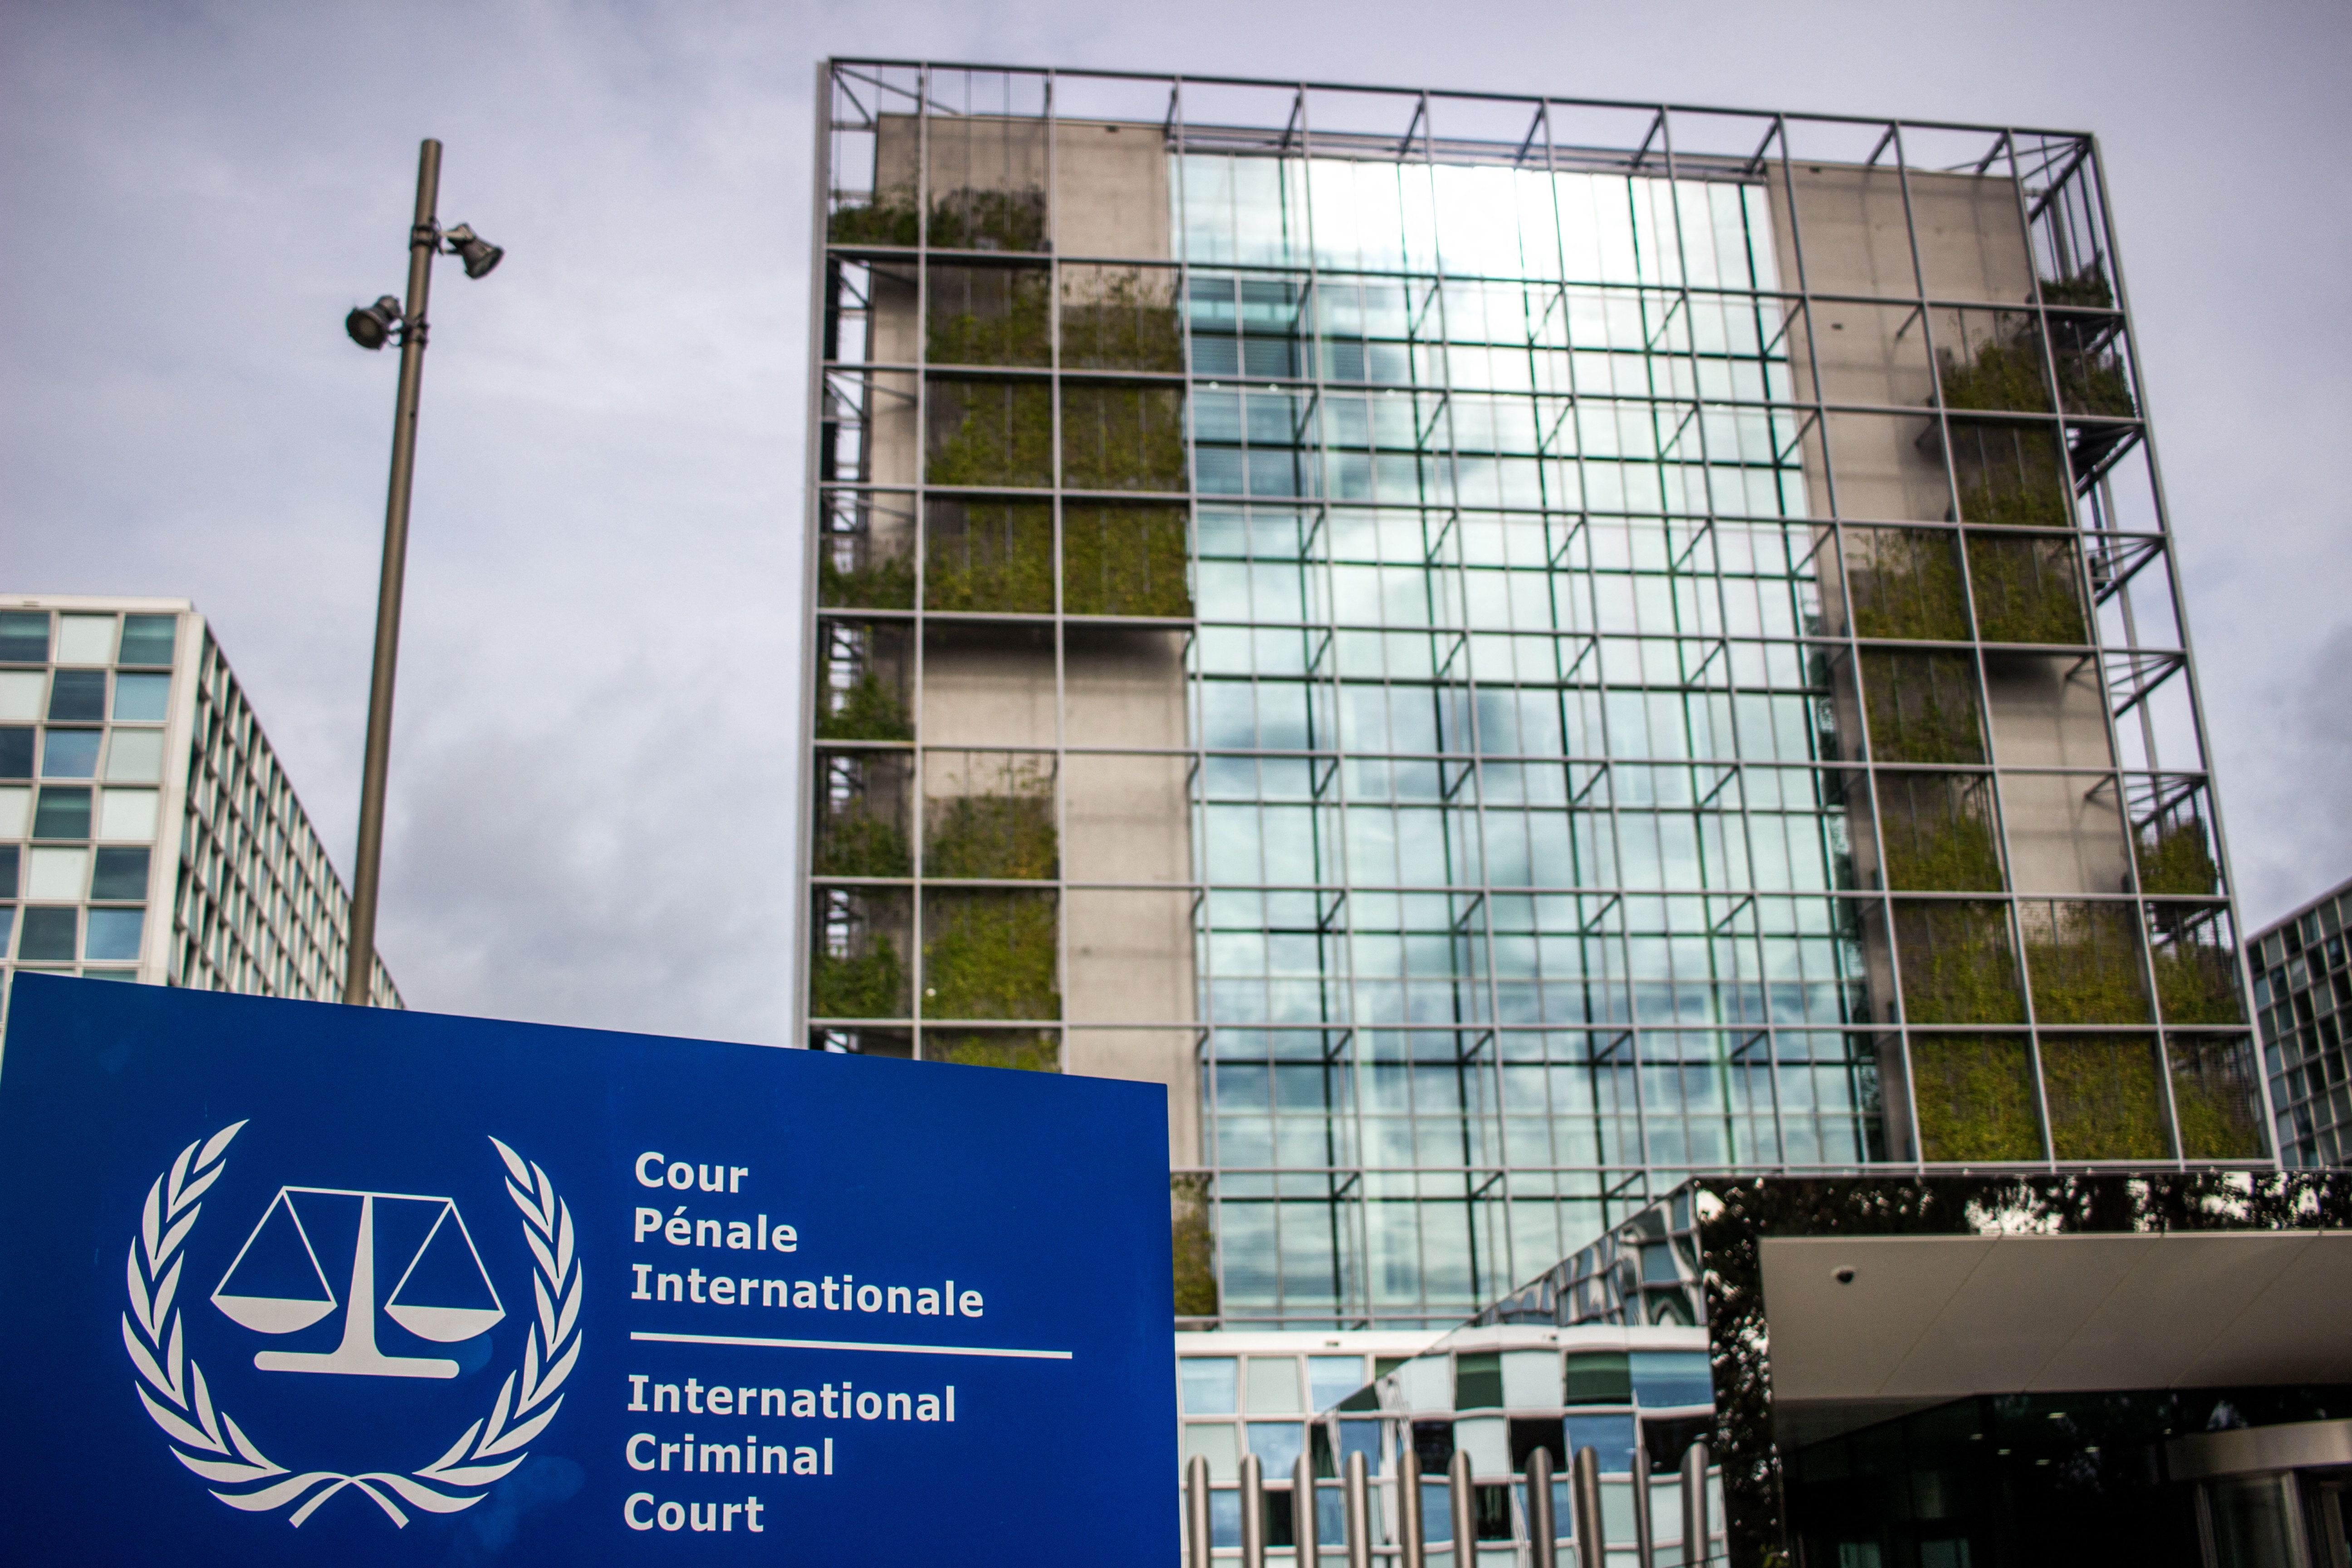 September 10, 2018 - The Hague, Netherlands: Building of the International Criminal Court, an intergovernmental organization and international tribunal. The ICC has the jurisdiction to prosecute individuals for the international crimes of genocide, crimes against humanity, war crimes, and crimes of aggression. (Martin Bertrand/Polaris)